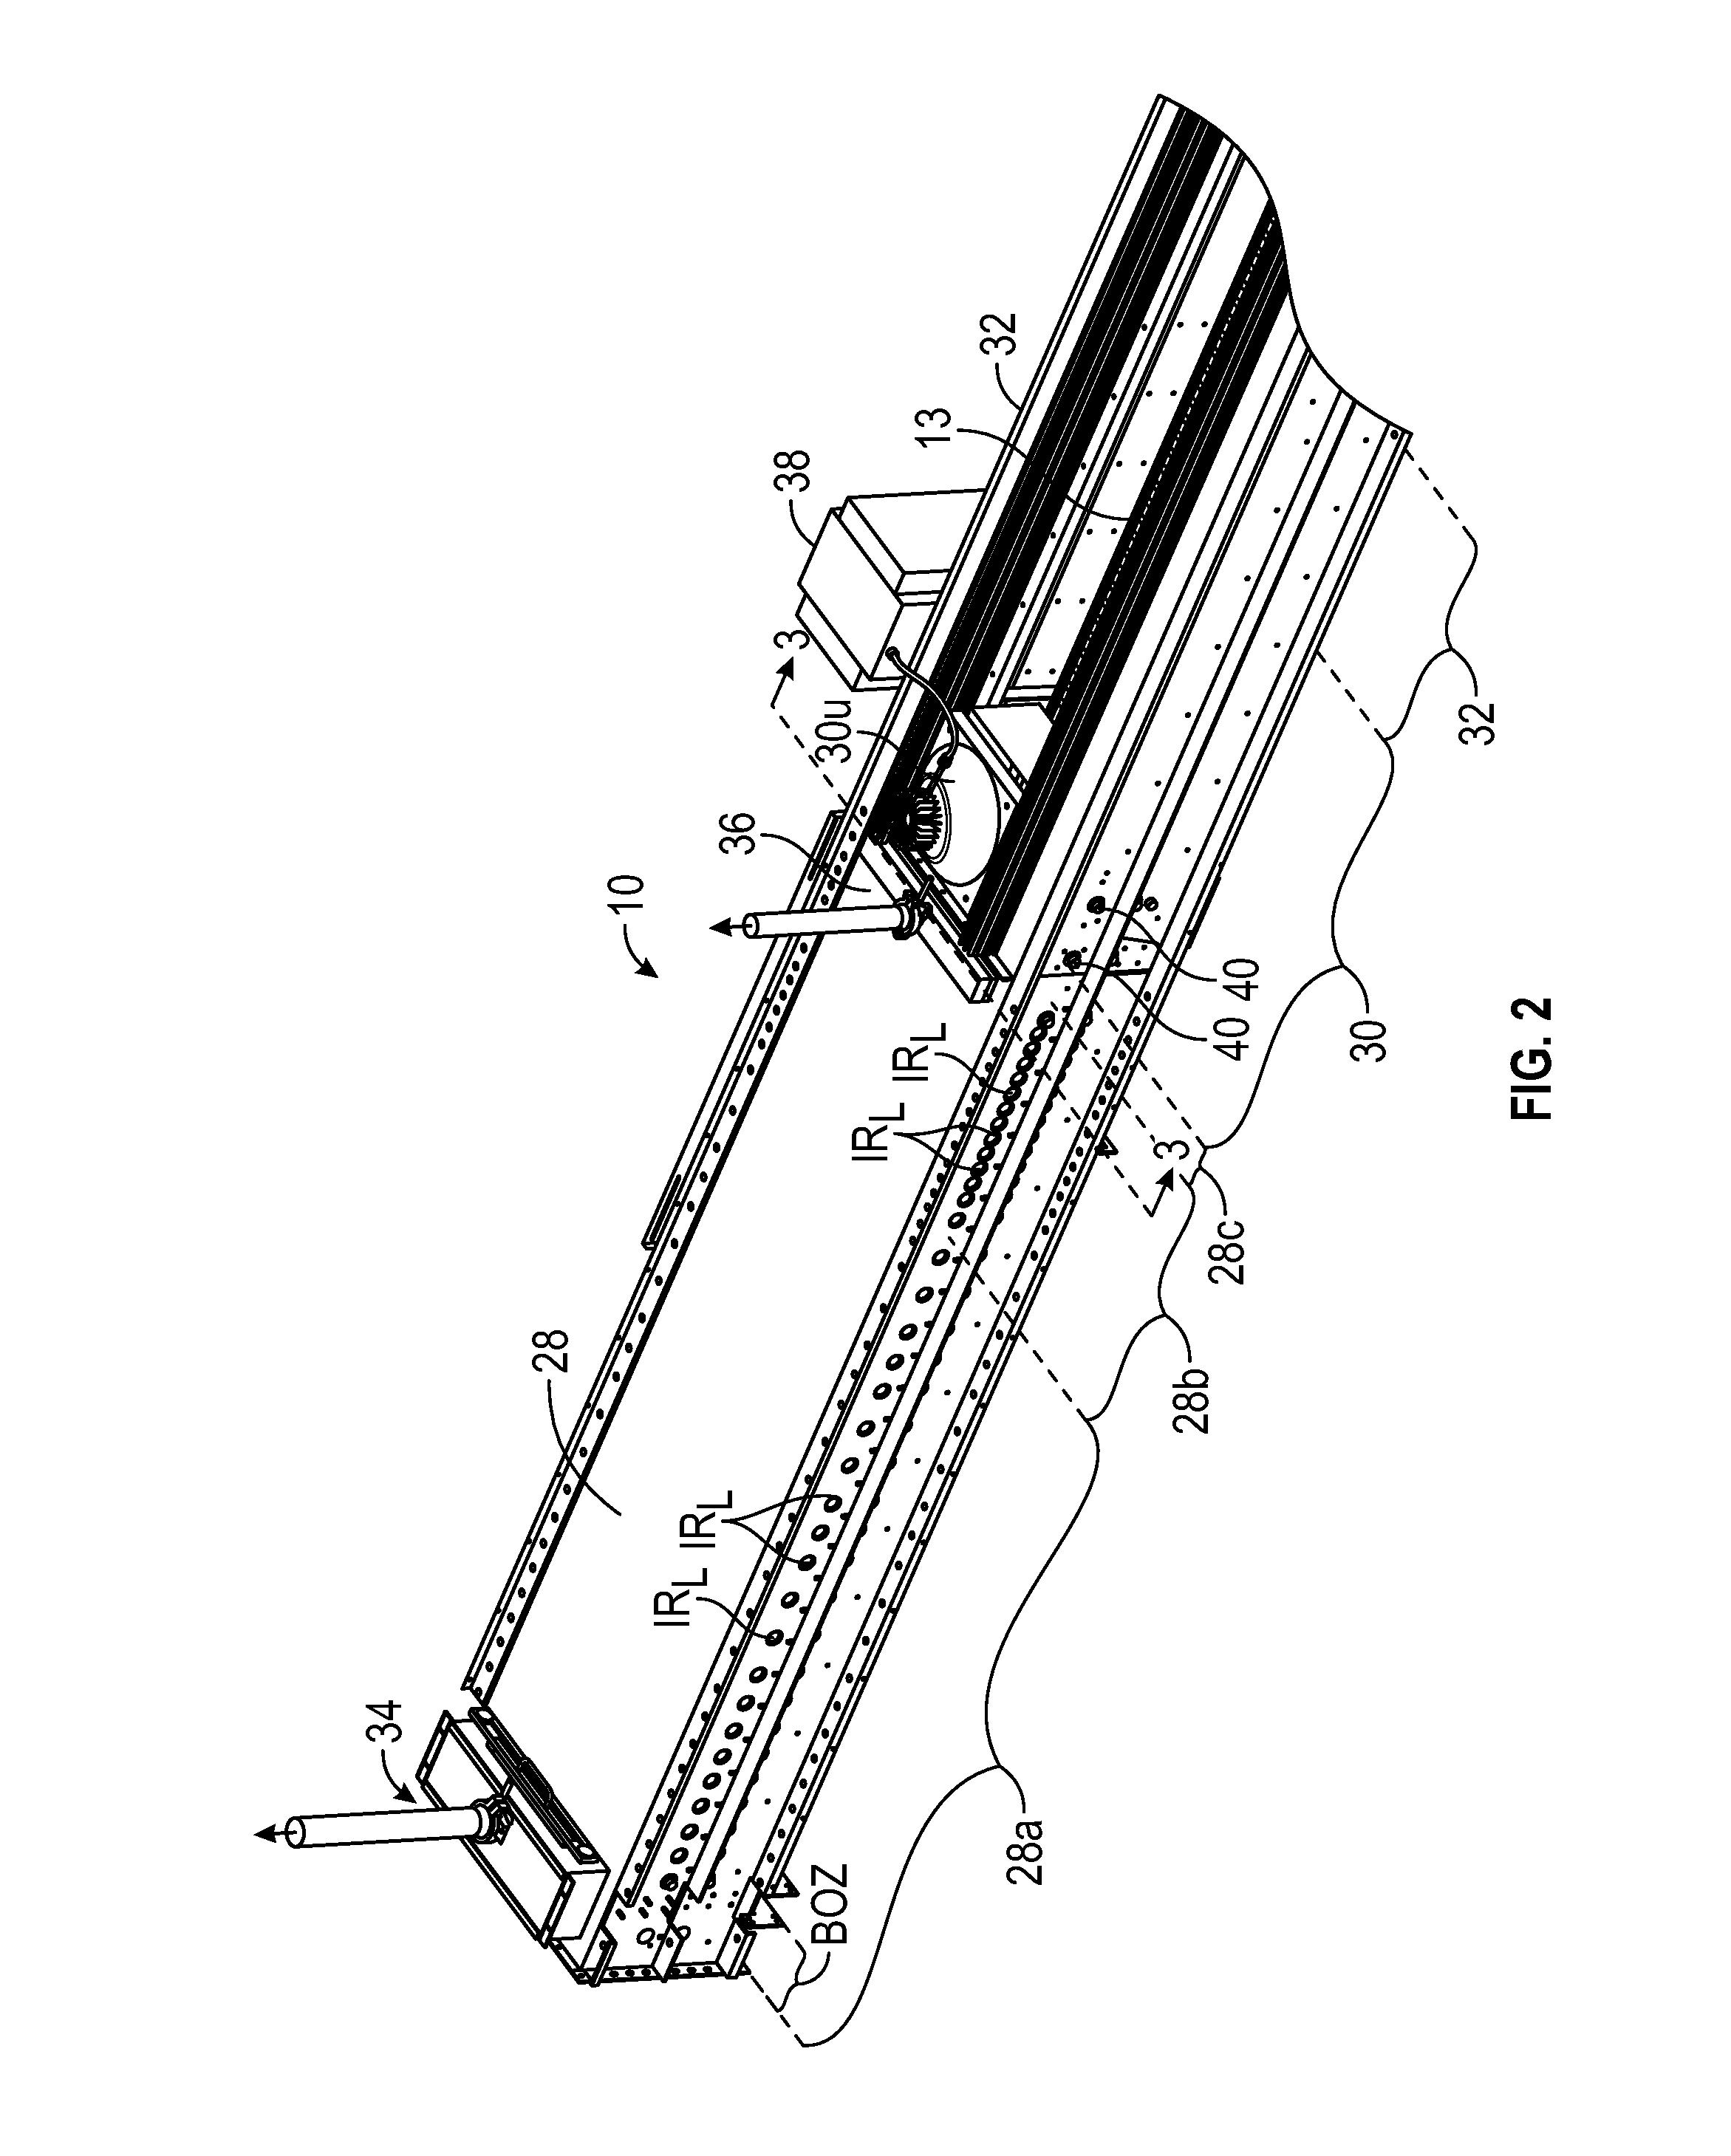 Method and Apparatus For Reduction of Solar Cell LID